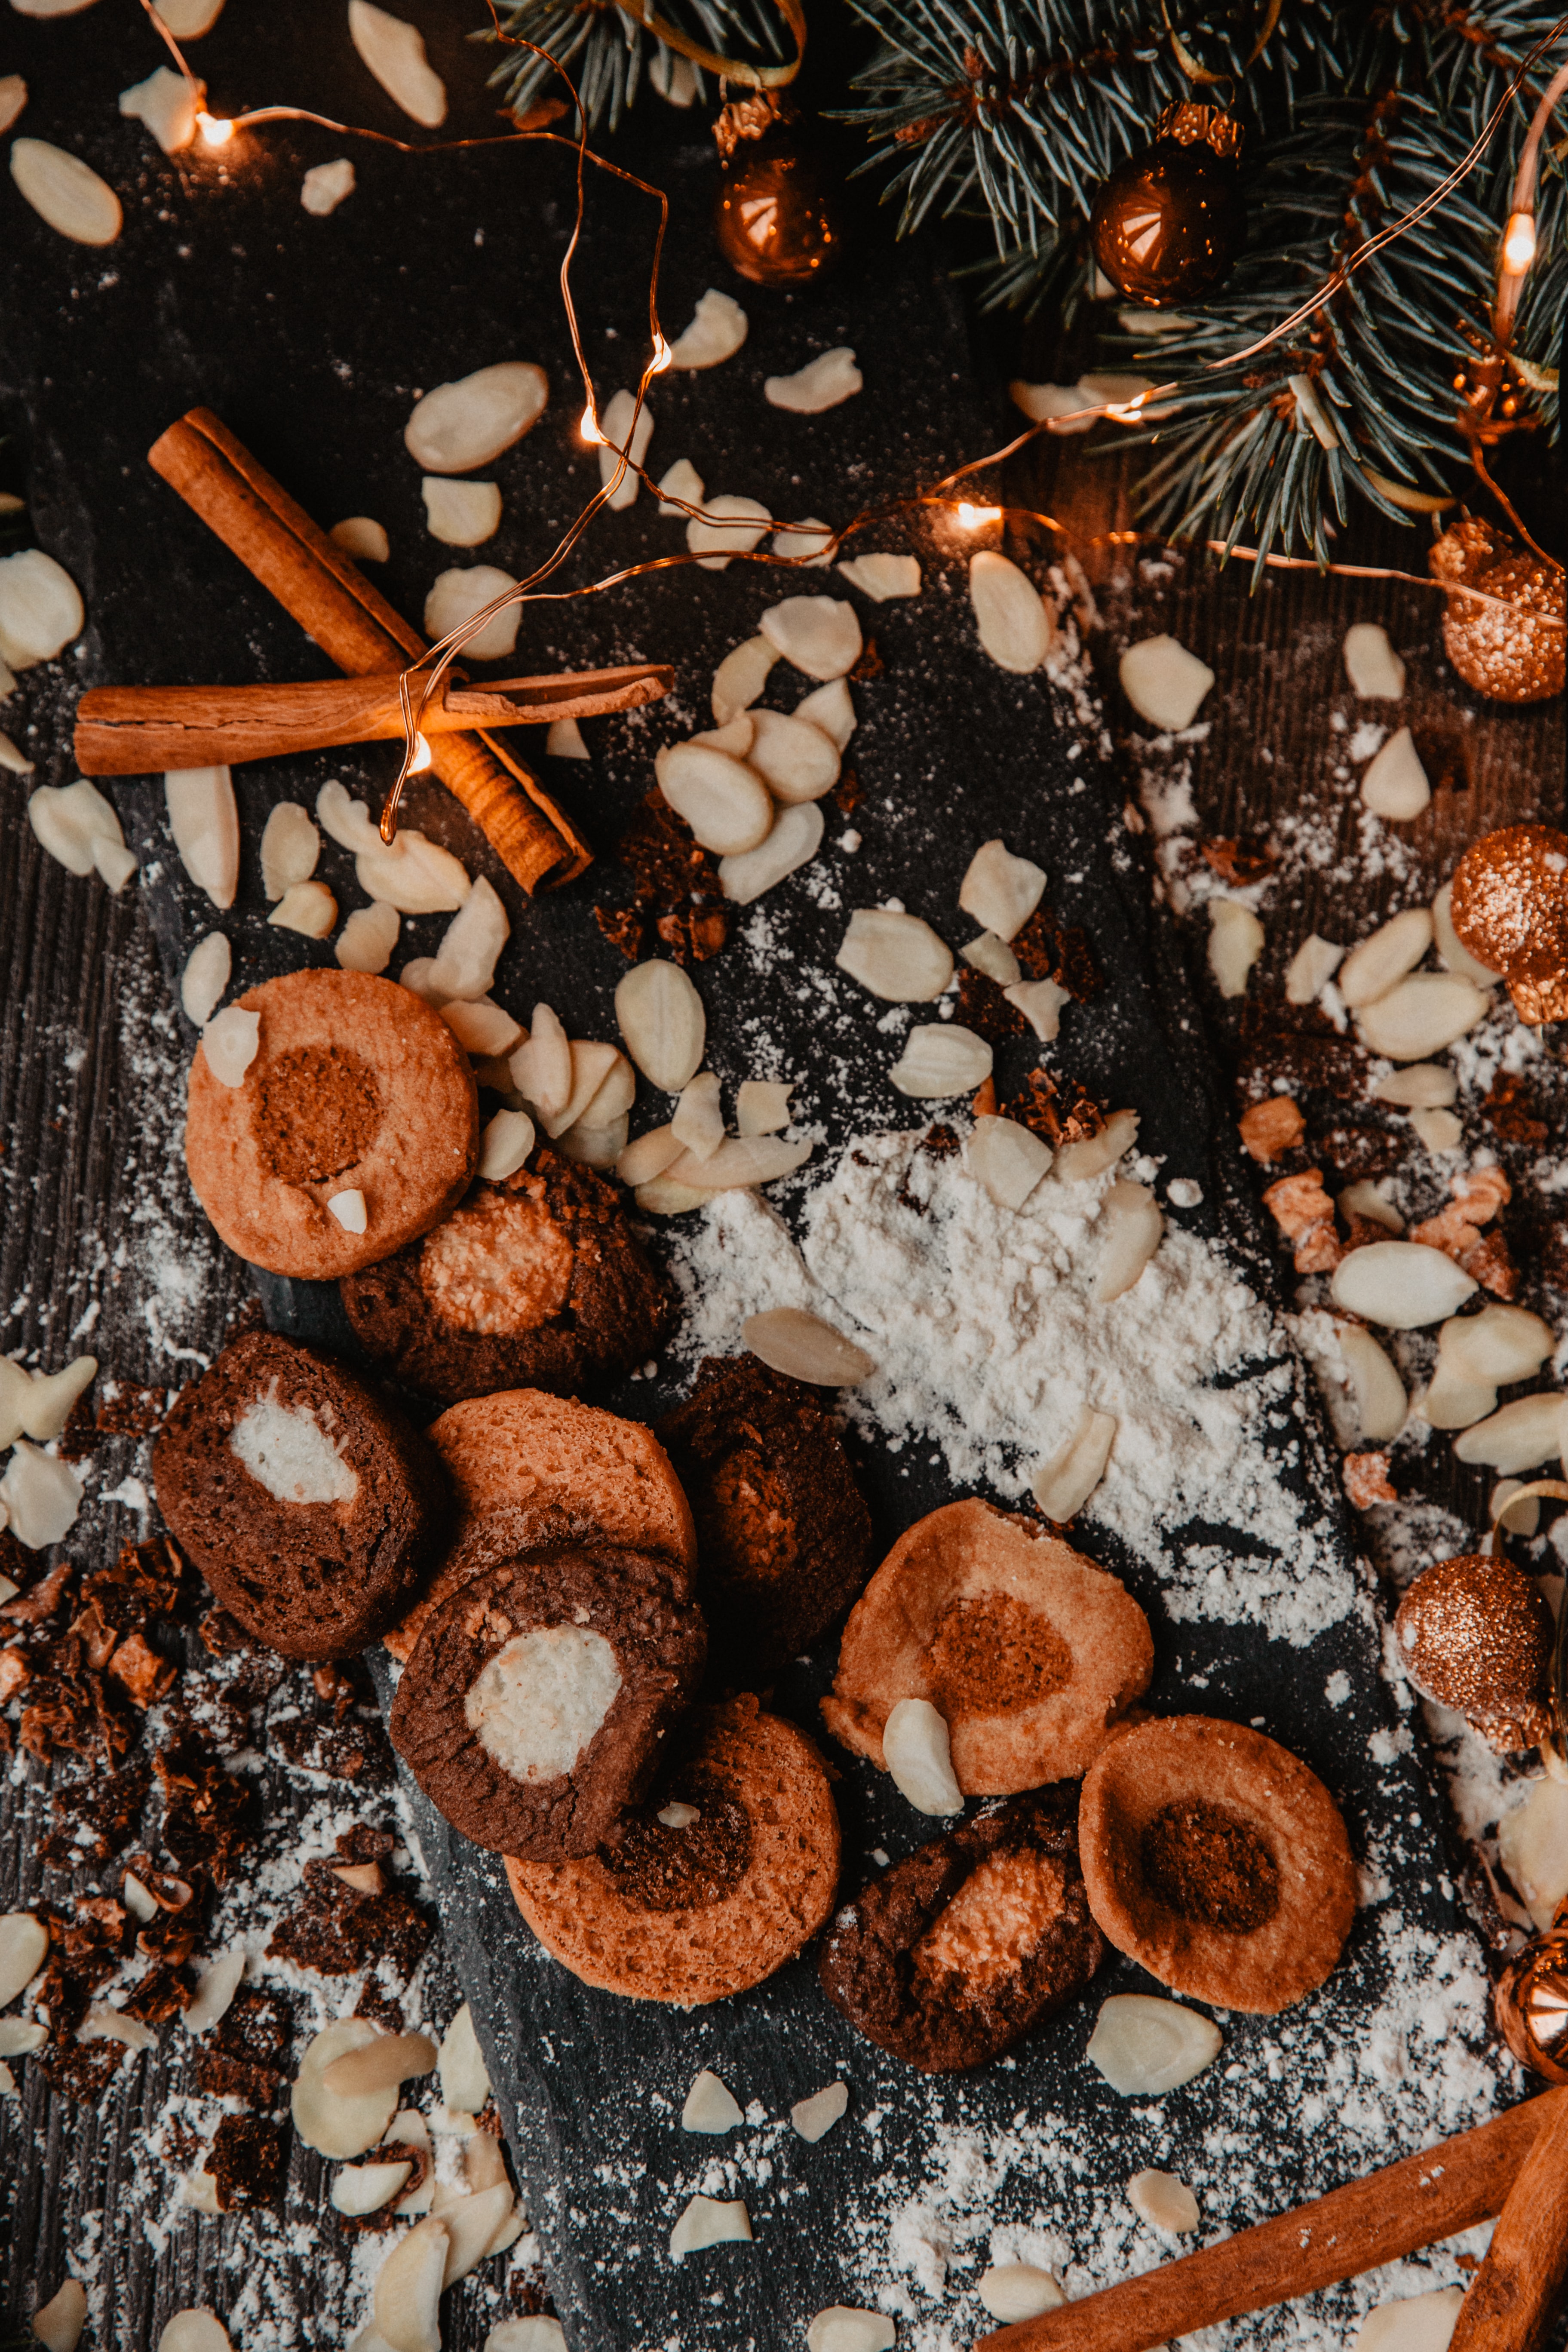 cookies, food, new year, christmas, garland, spice, spices Image for desktop